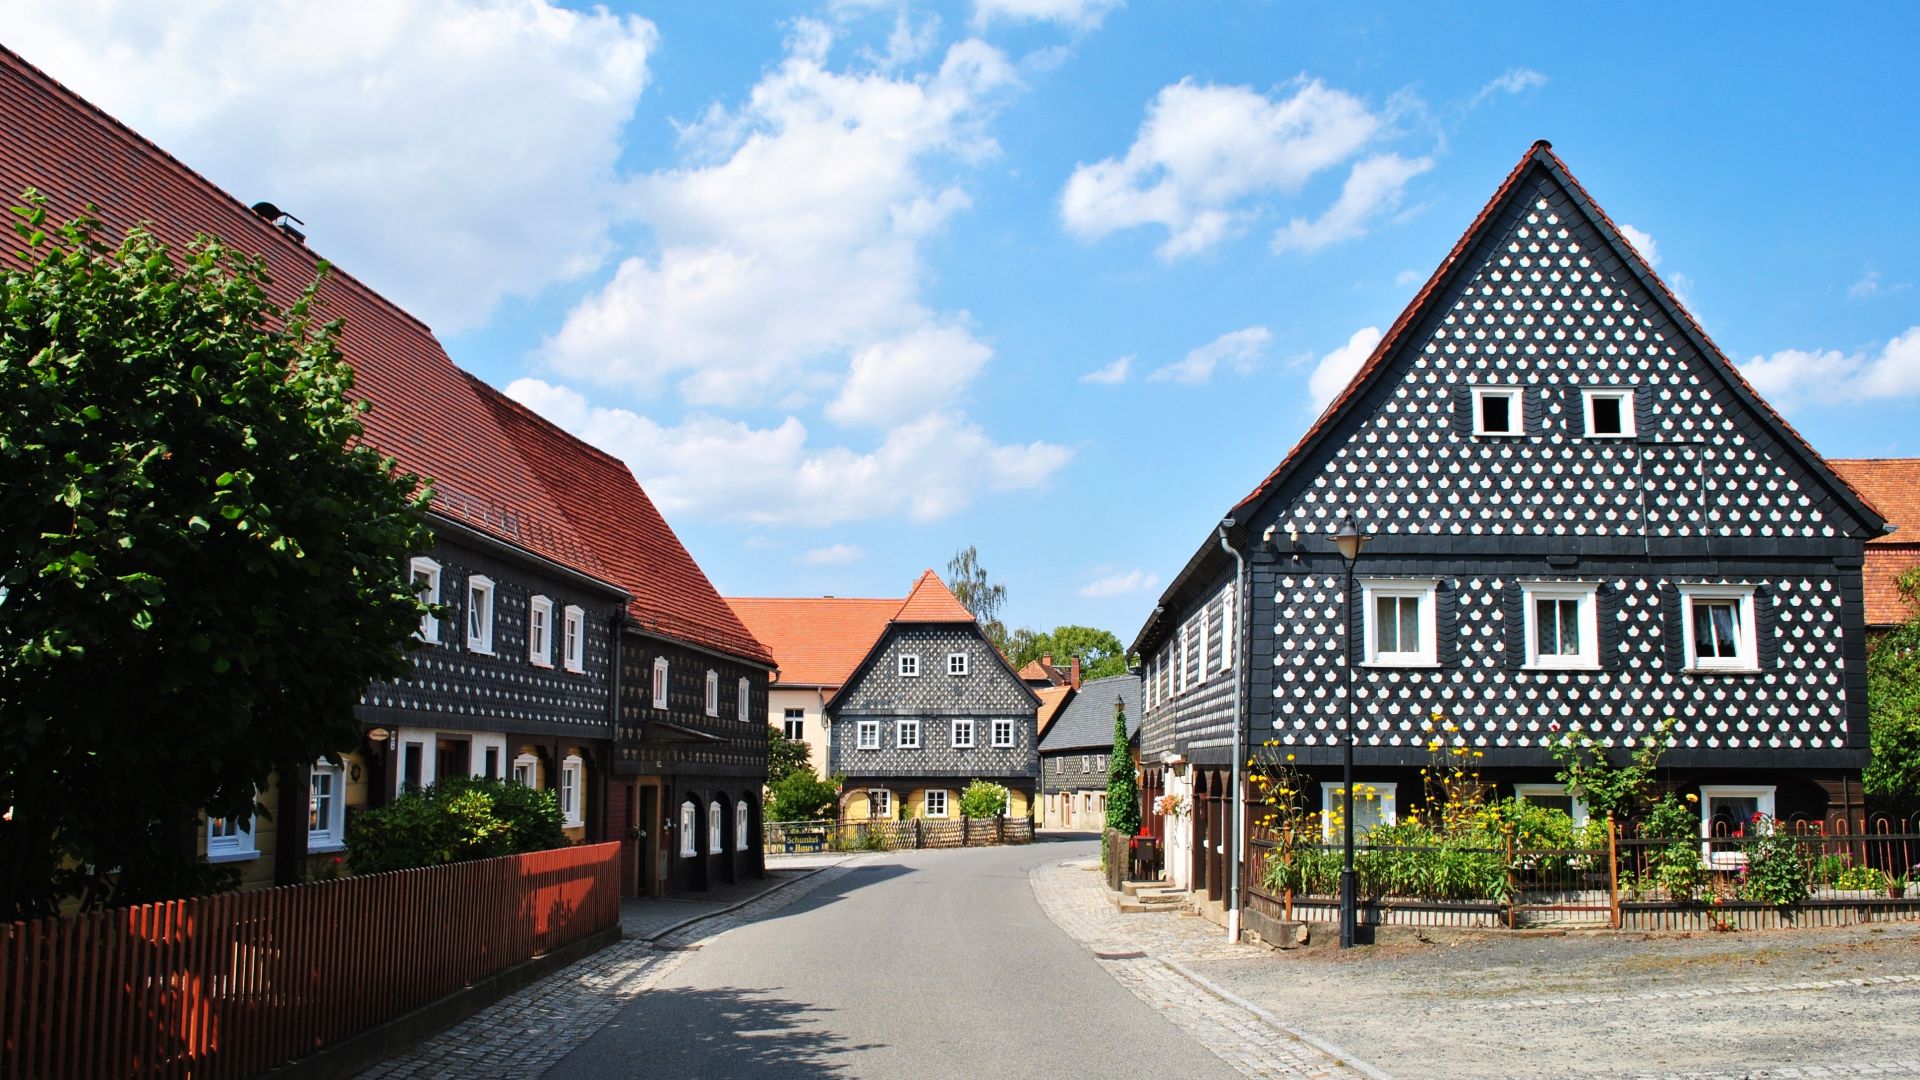 Kottmar: half-timbered houses in the district of Obercunnersdorf